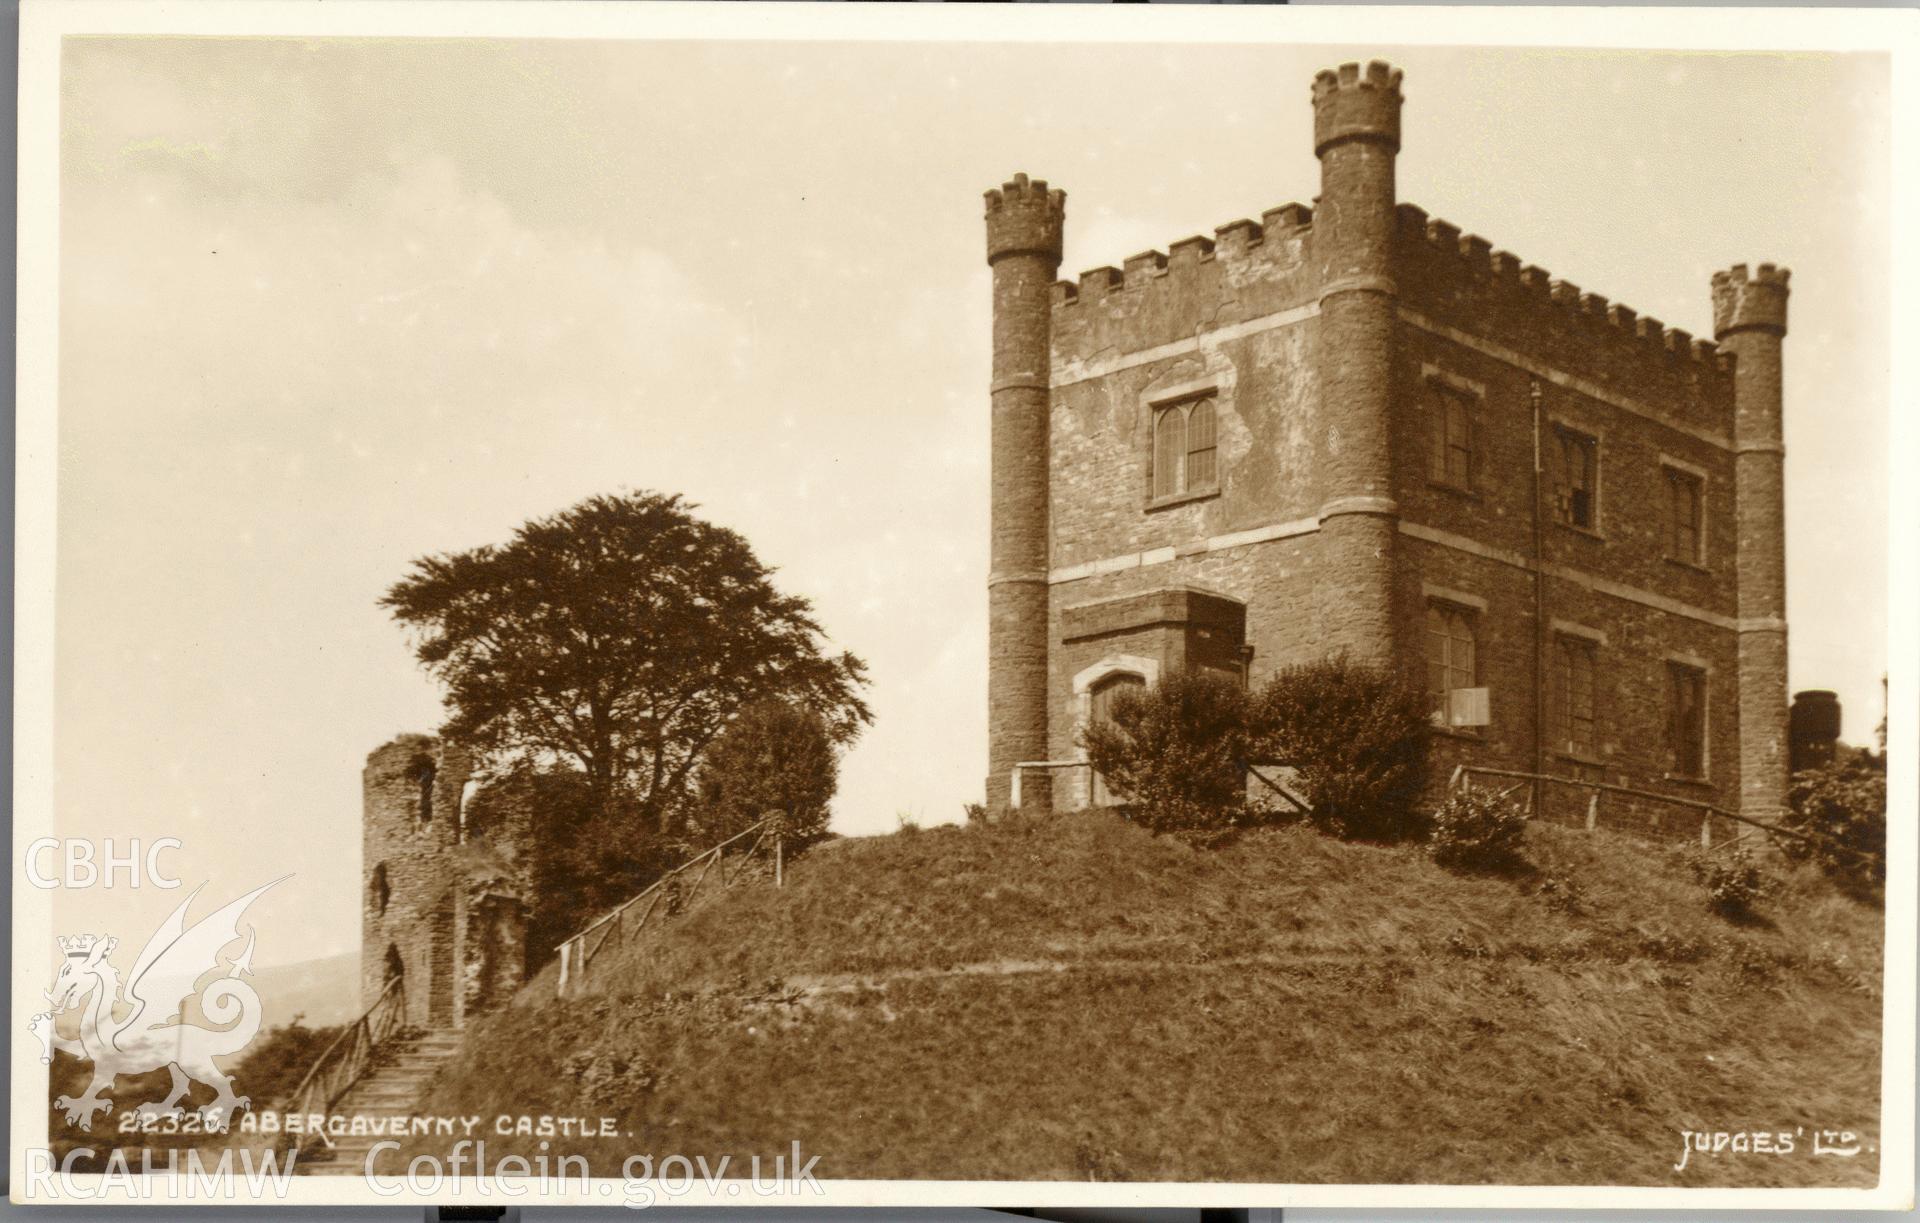 Digitised postcard image of Abergavenny Castle, Judges Ltd. Produced by Parks and Gardens Data Services, from an original item in the Peter Davis Collection at Parks and Gardens UK. We hold only web-resolution images of this collection, suitable for viewing on screen and for research purposes only. We do not hold the original images, or publication quality scans.